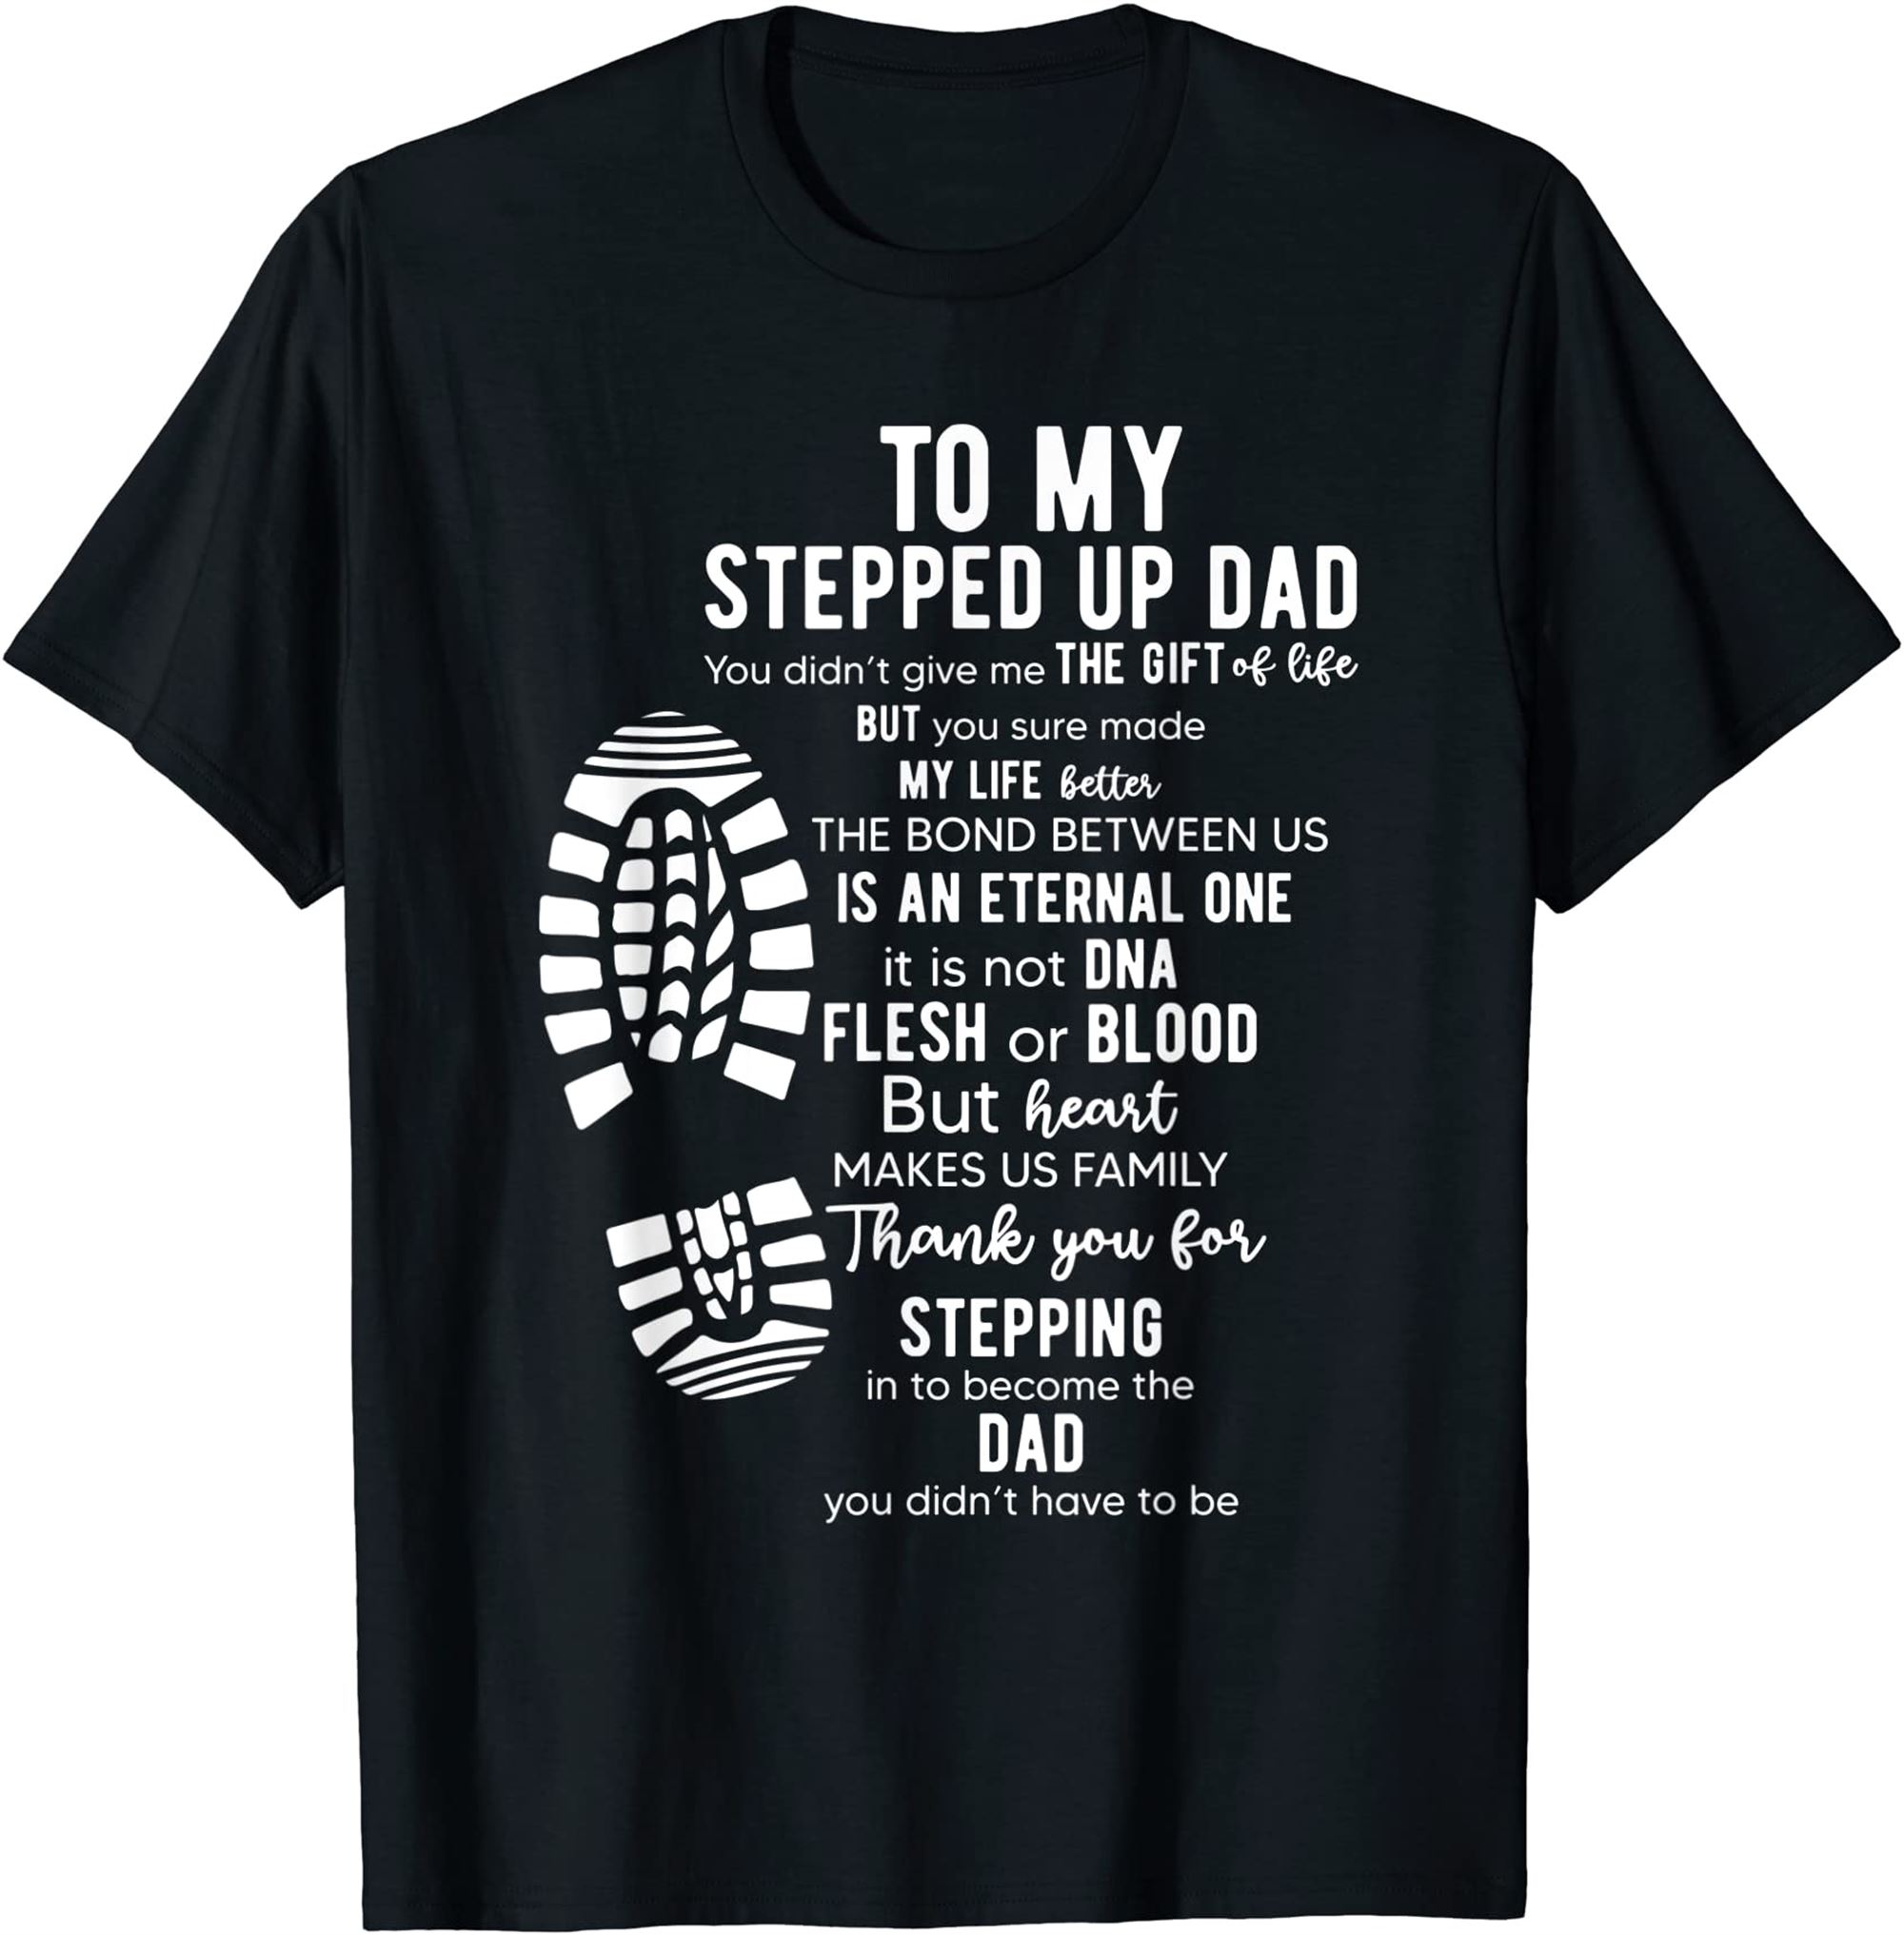 To My Stepped Up Dad Thanks You For Stepping Funny Gift T-shirt Size Up To 5xl